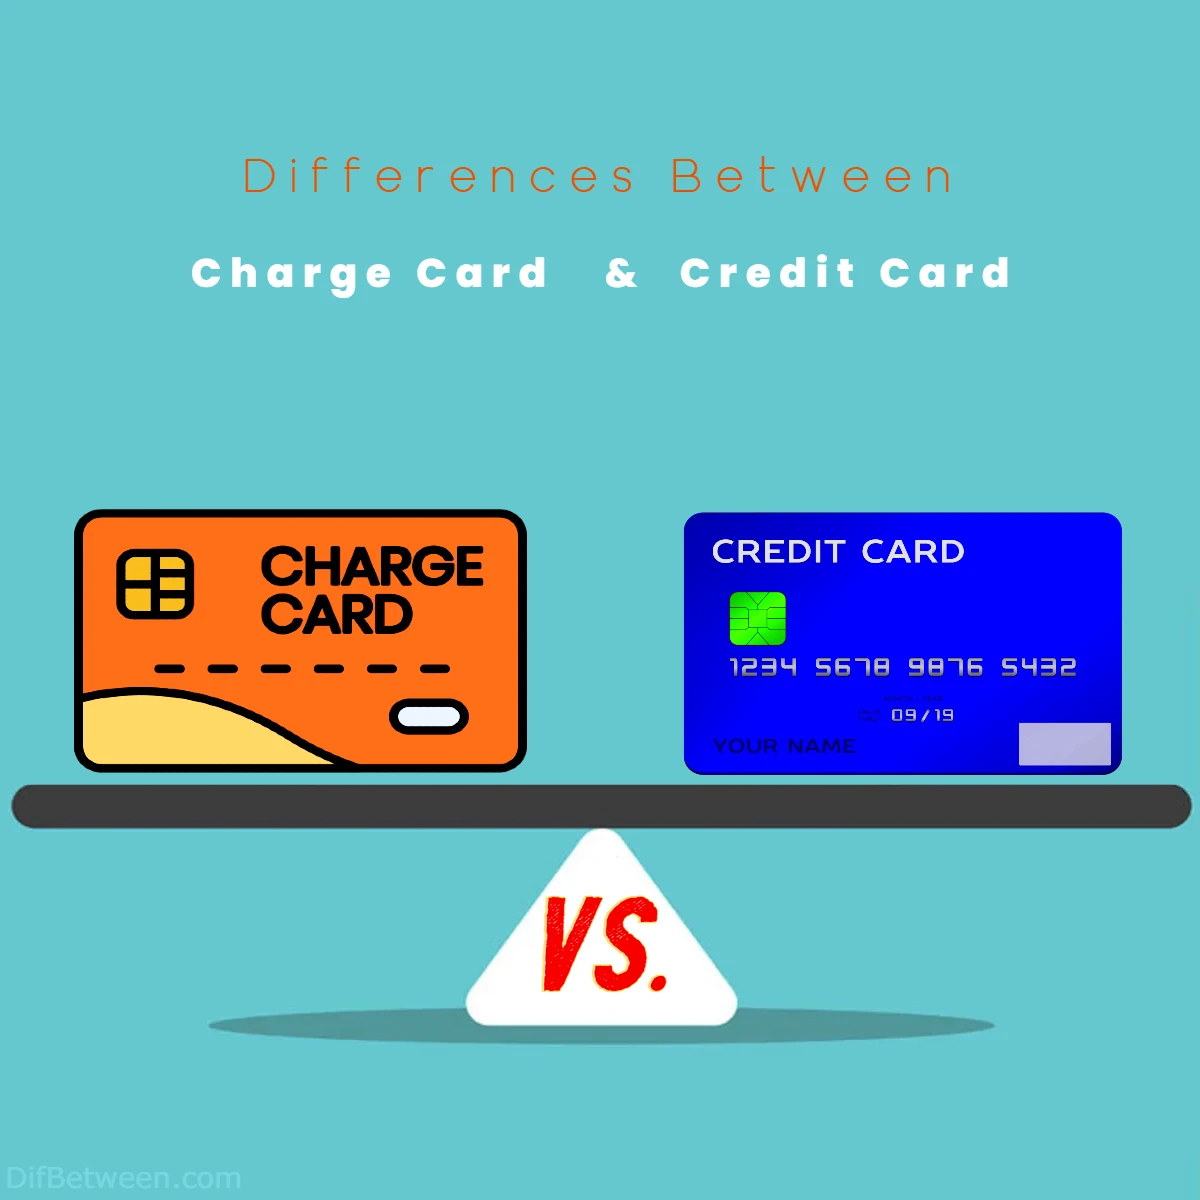 Differences Between Charge Card vs Credit Card